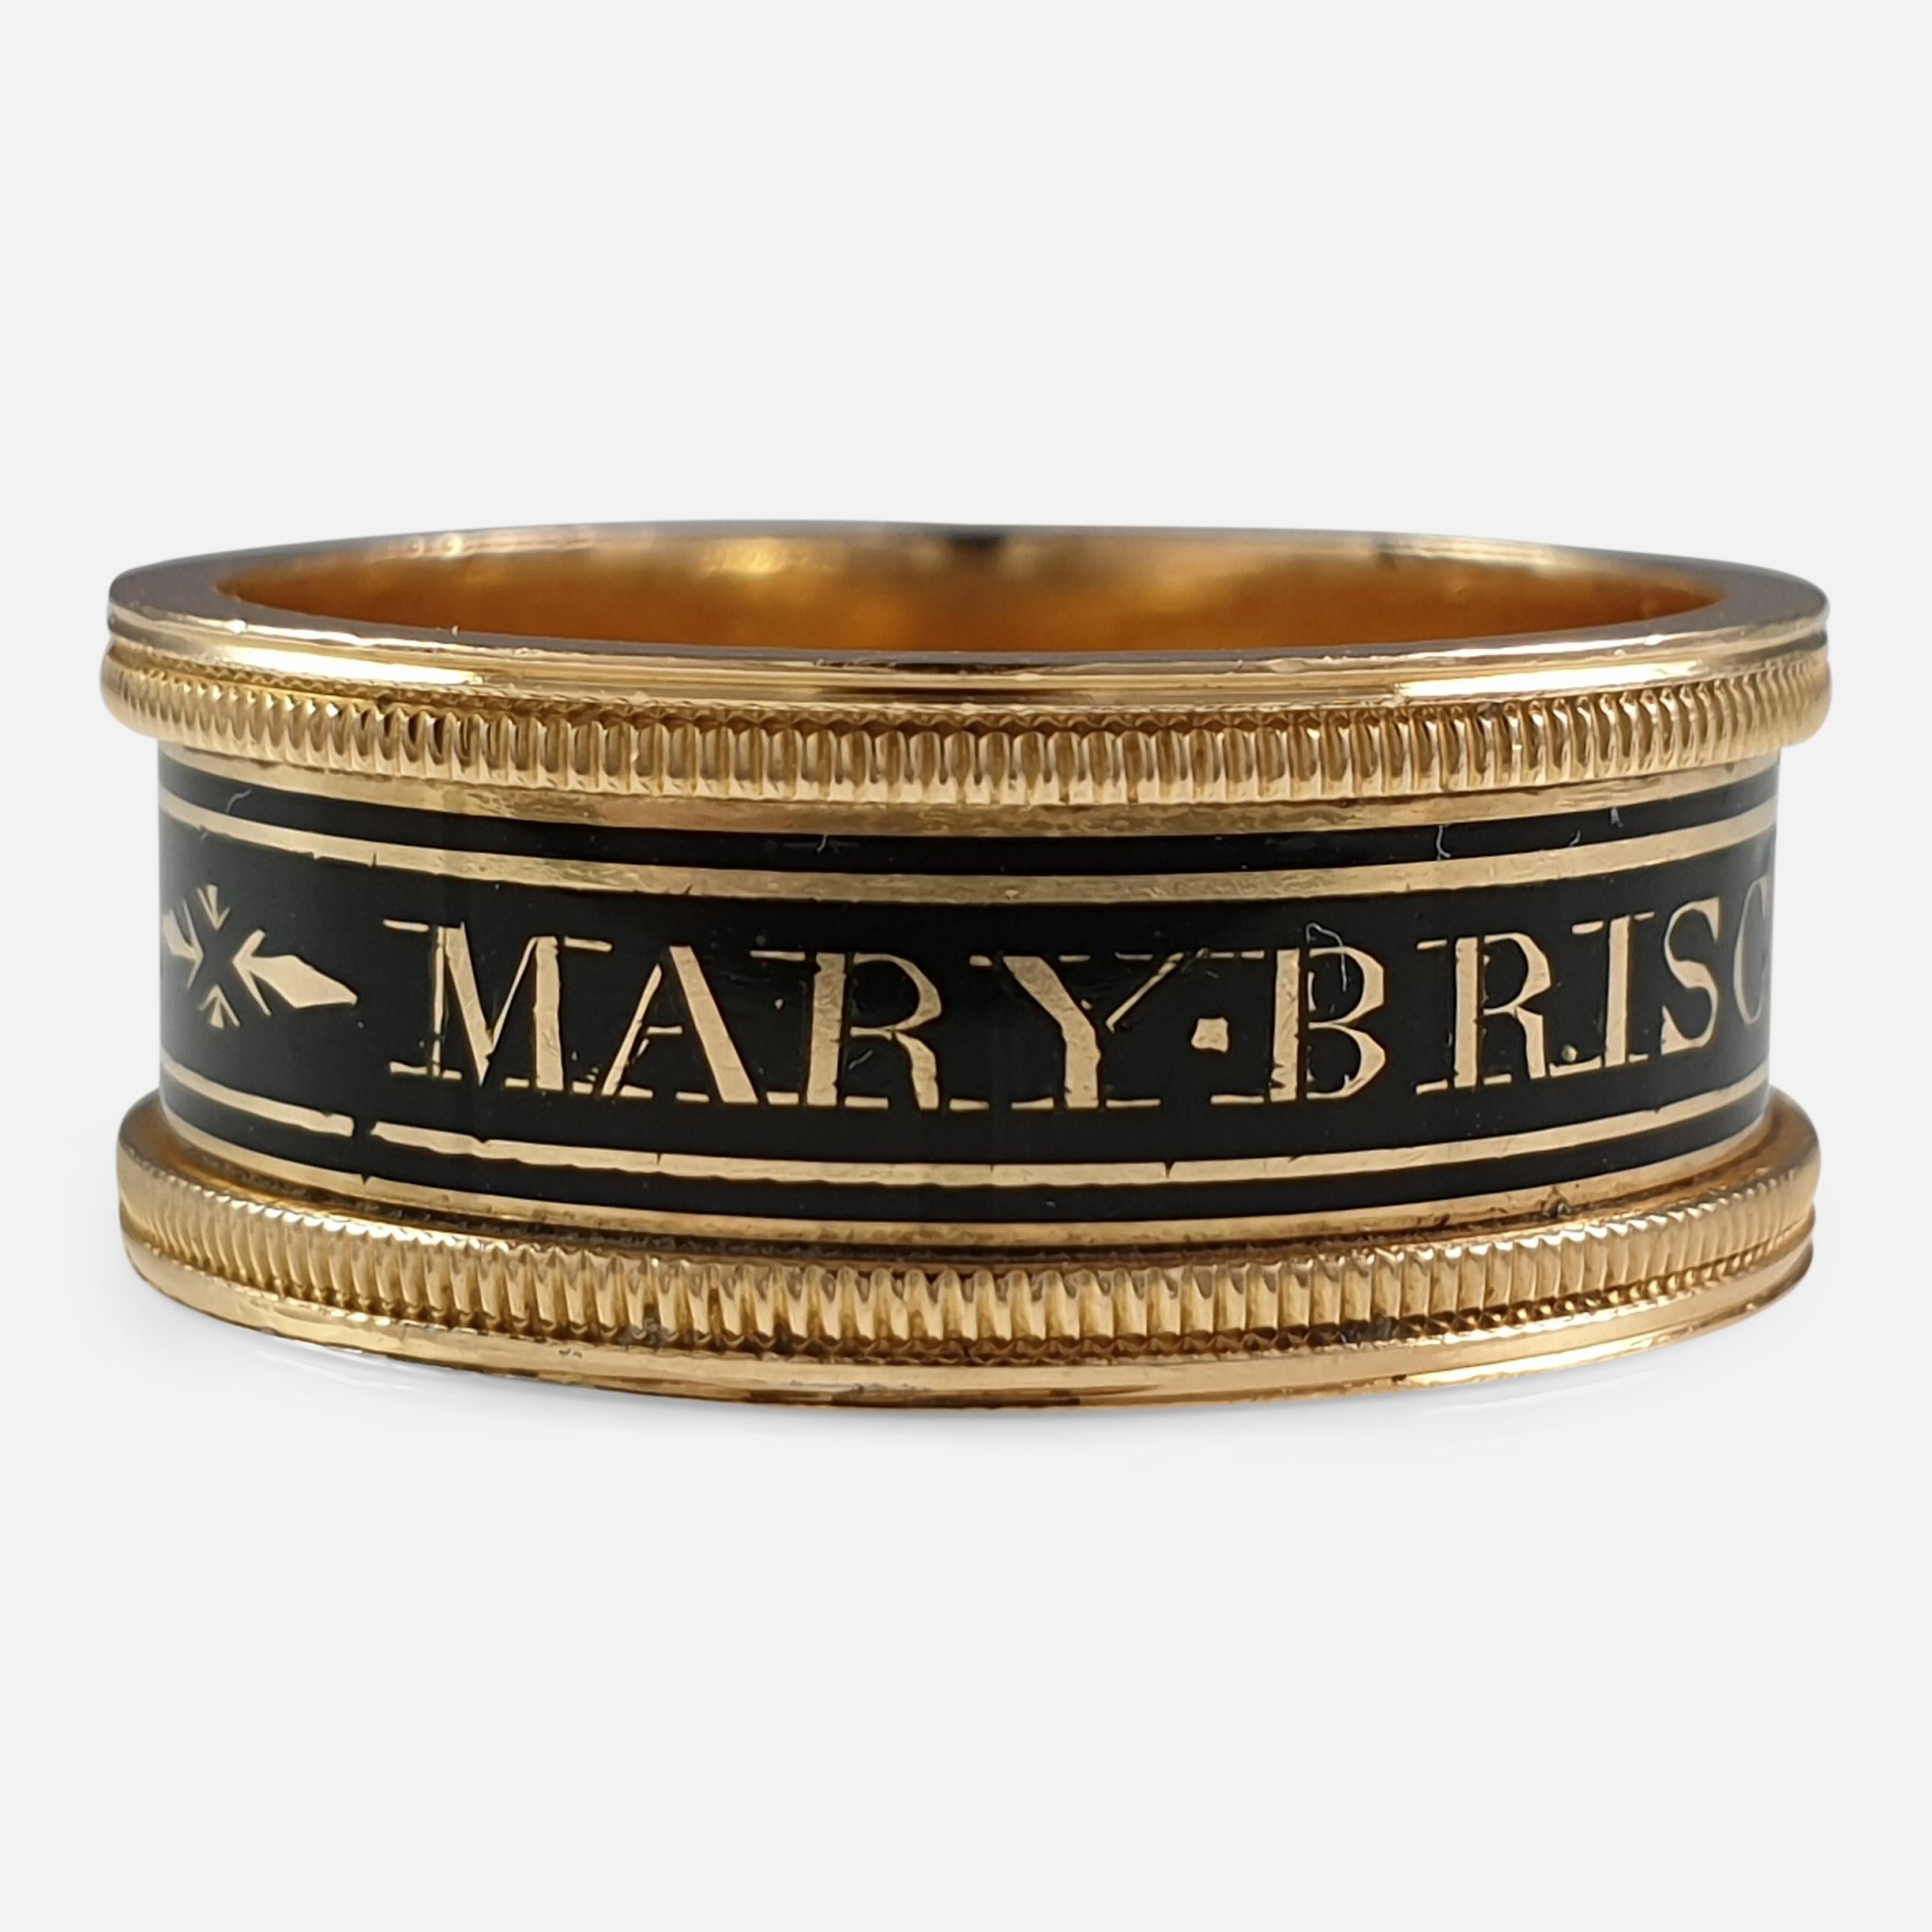 A George III 18k yellow gold and black enamel memorial mourning ring. The band reads 